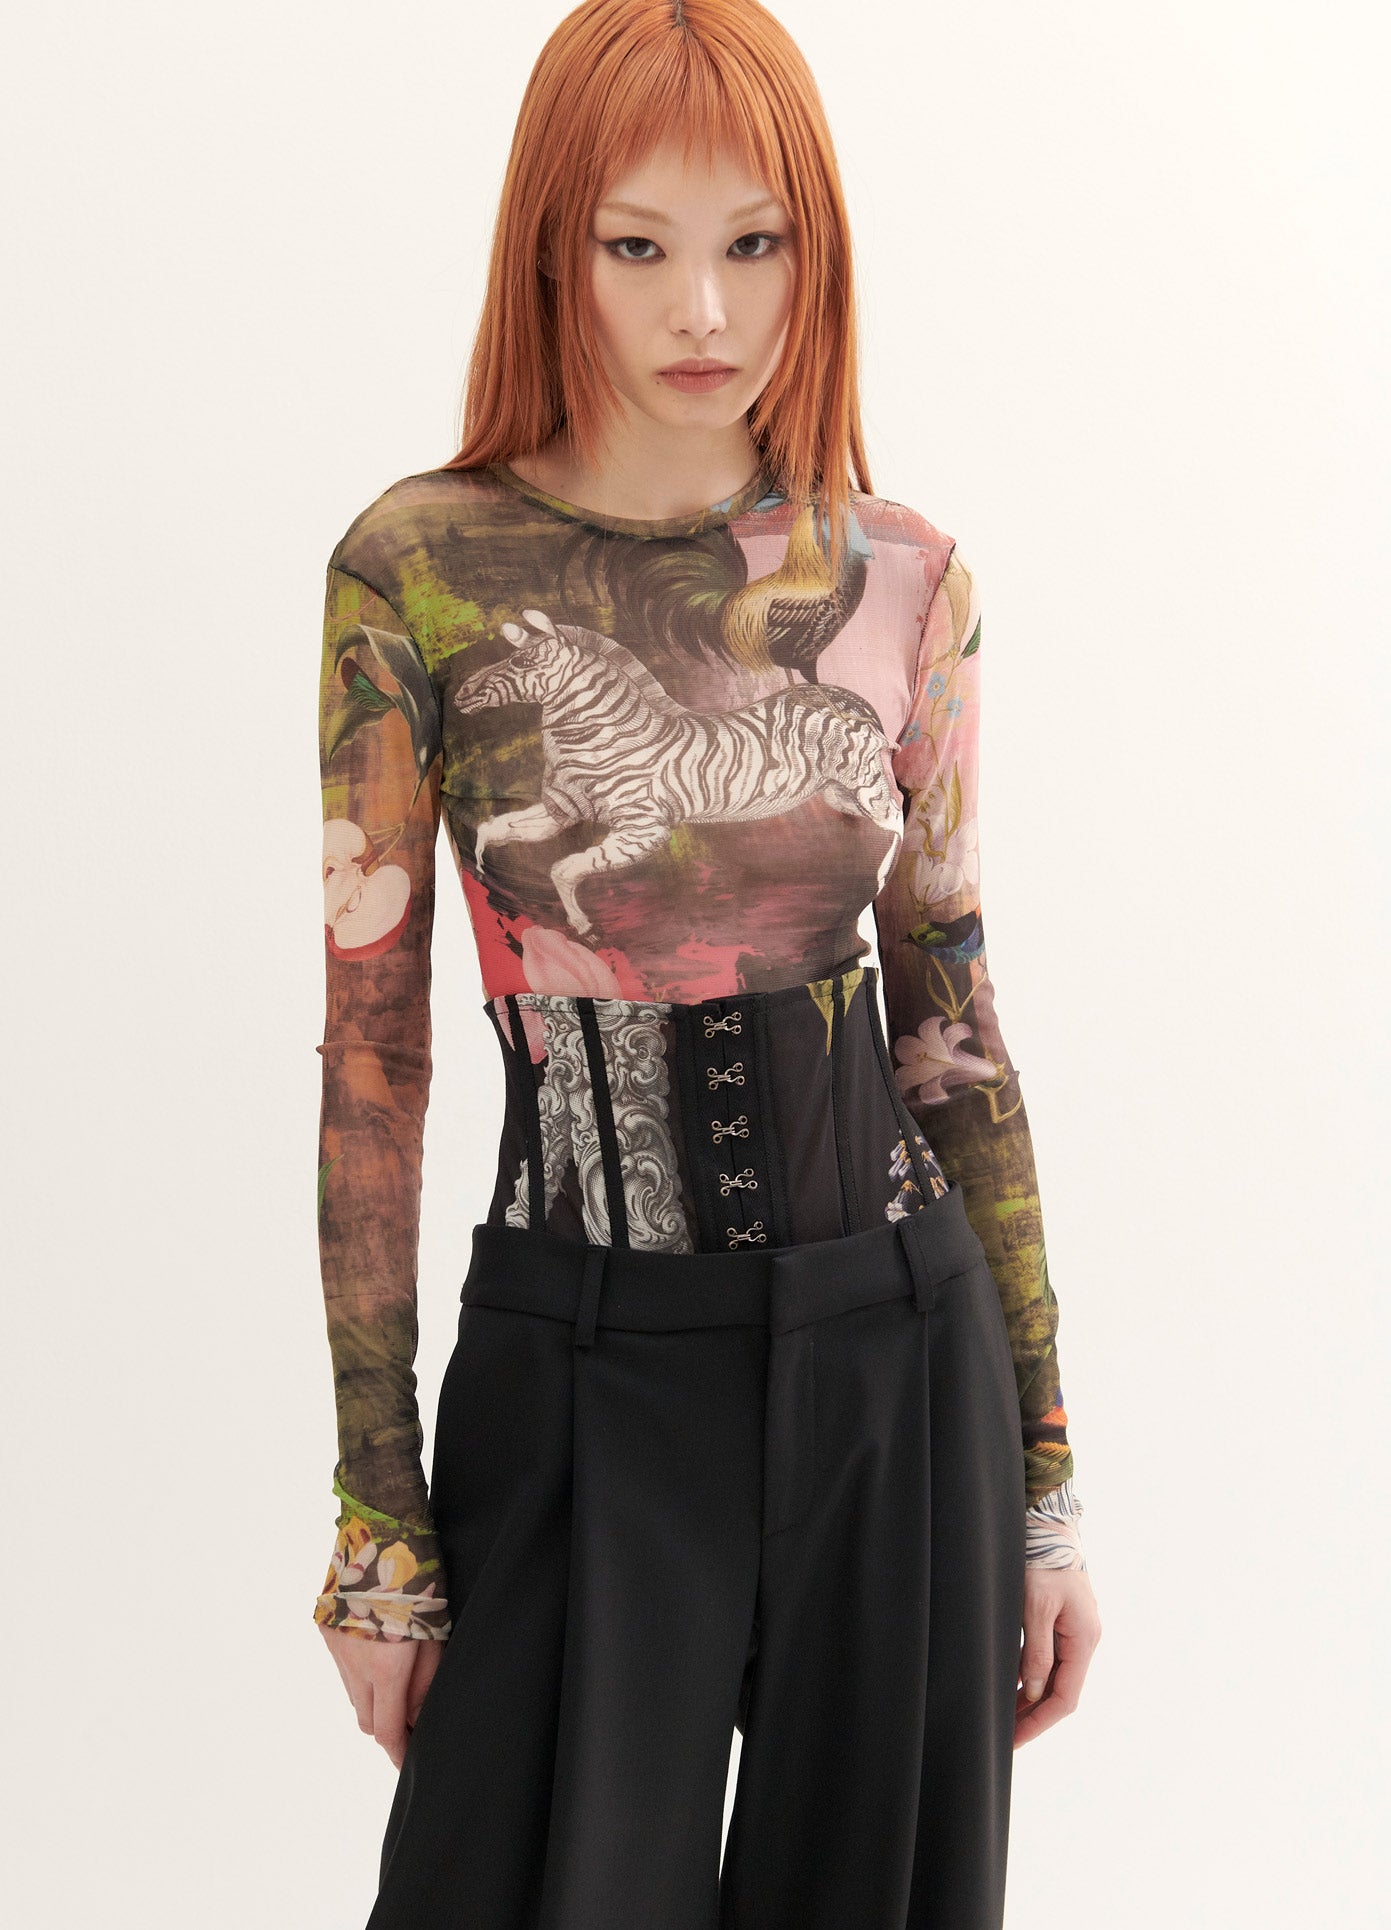 MONSE Print Mesh Top in Print Multi on Model Front View